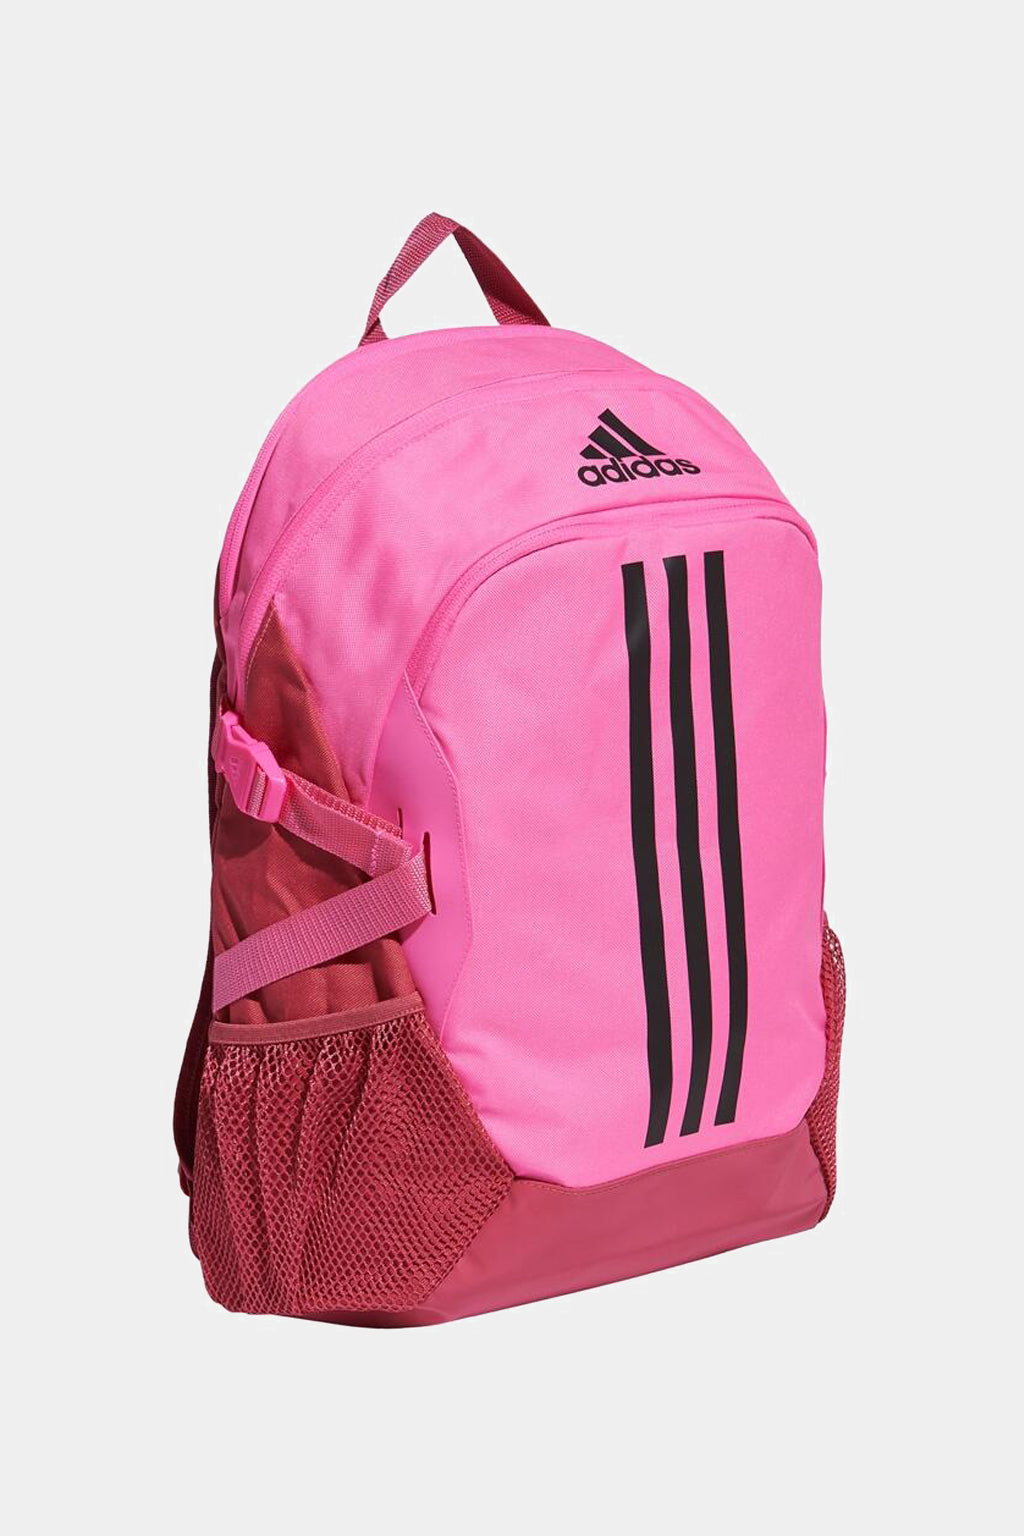 Adidas - Power 5 Backpack